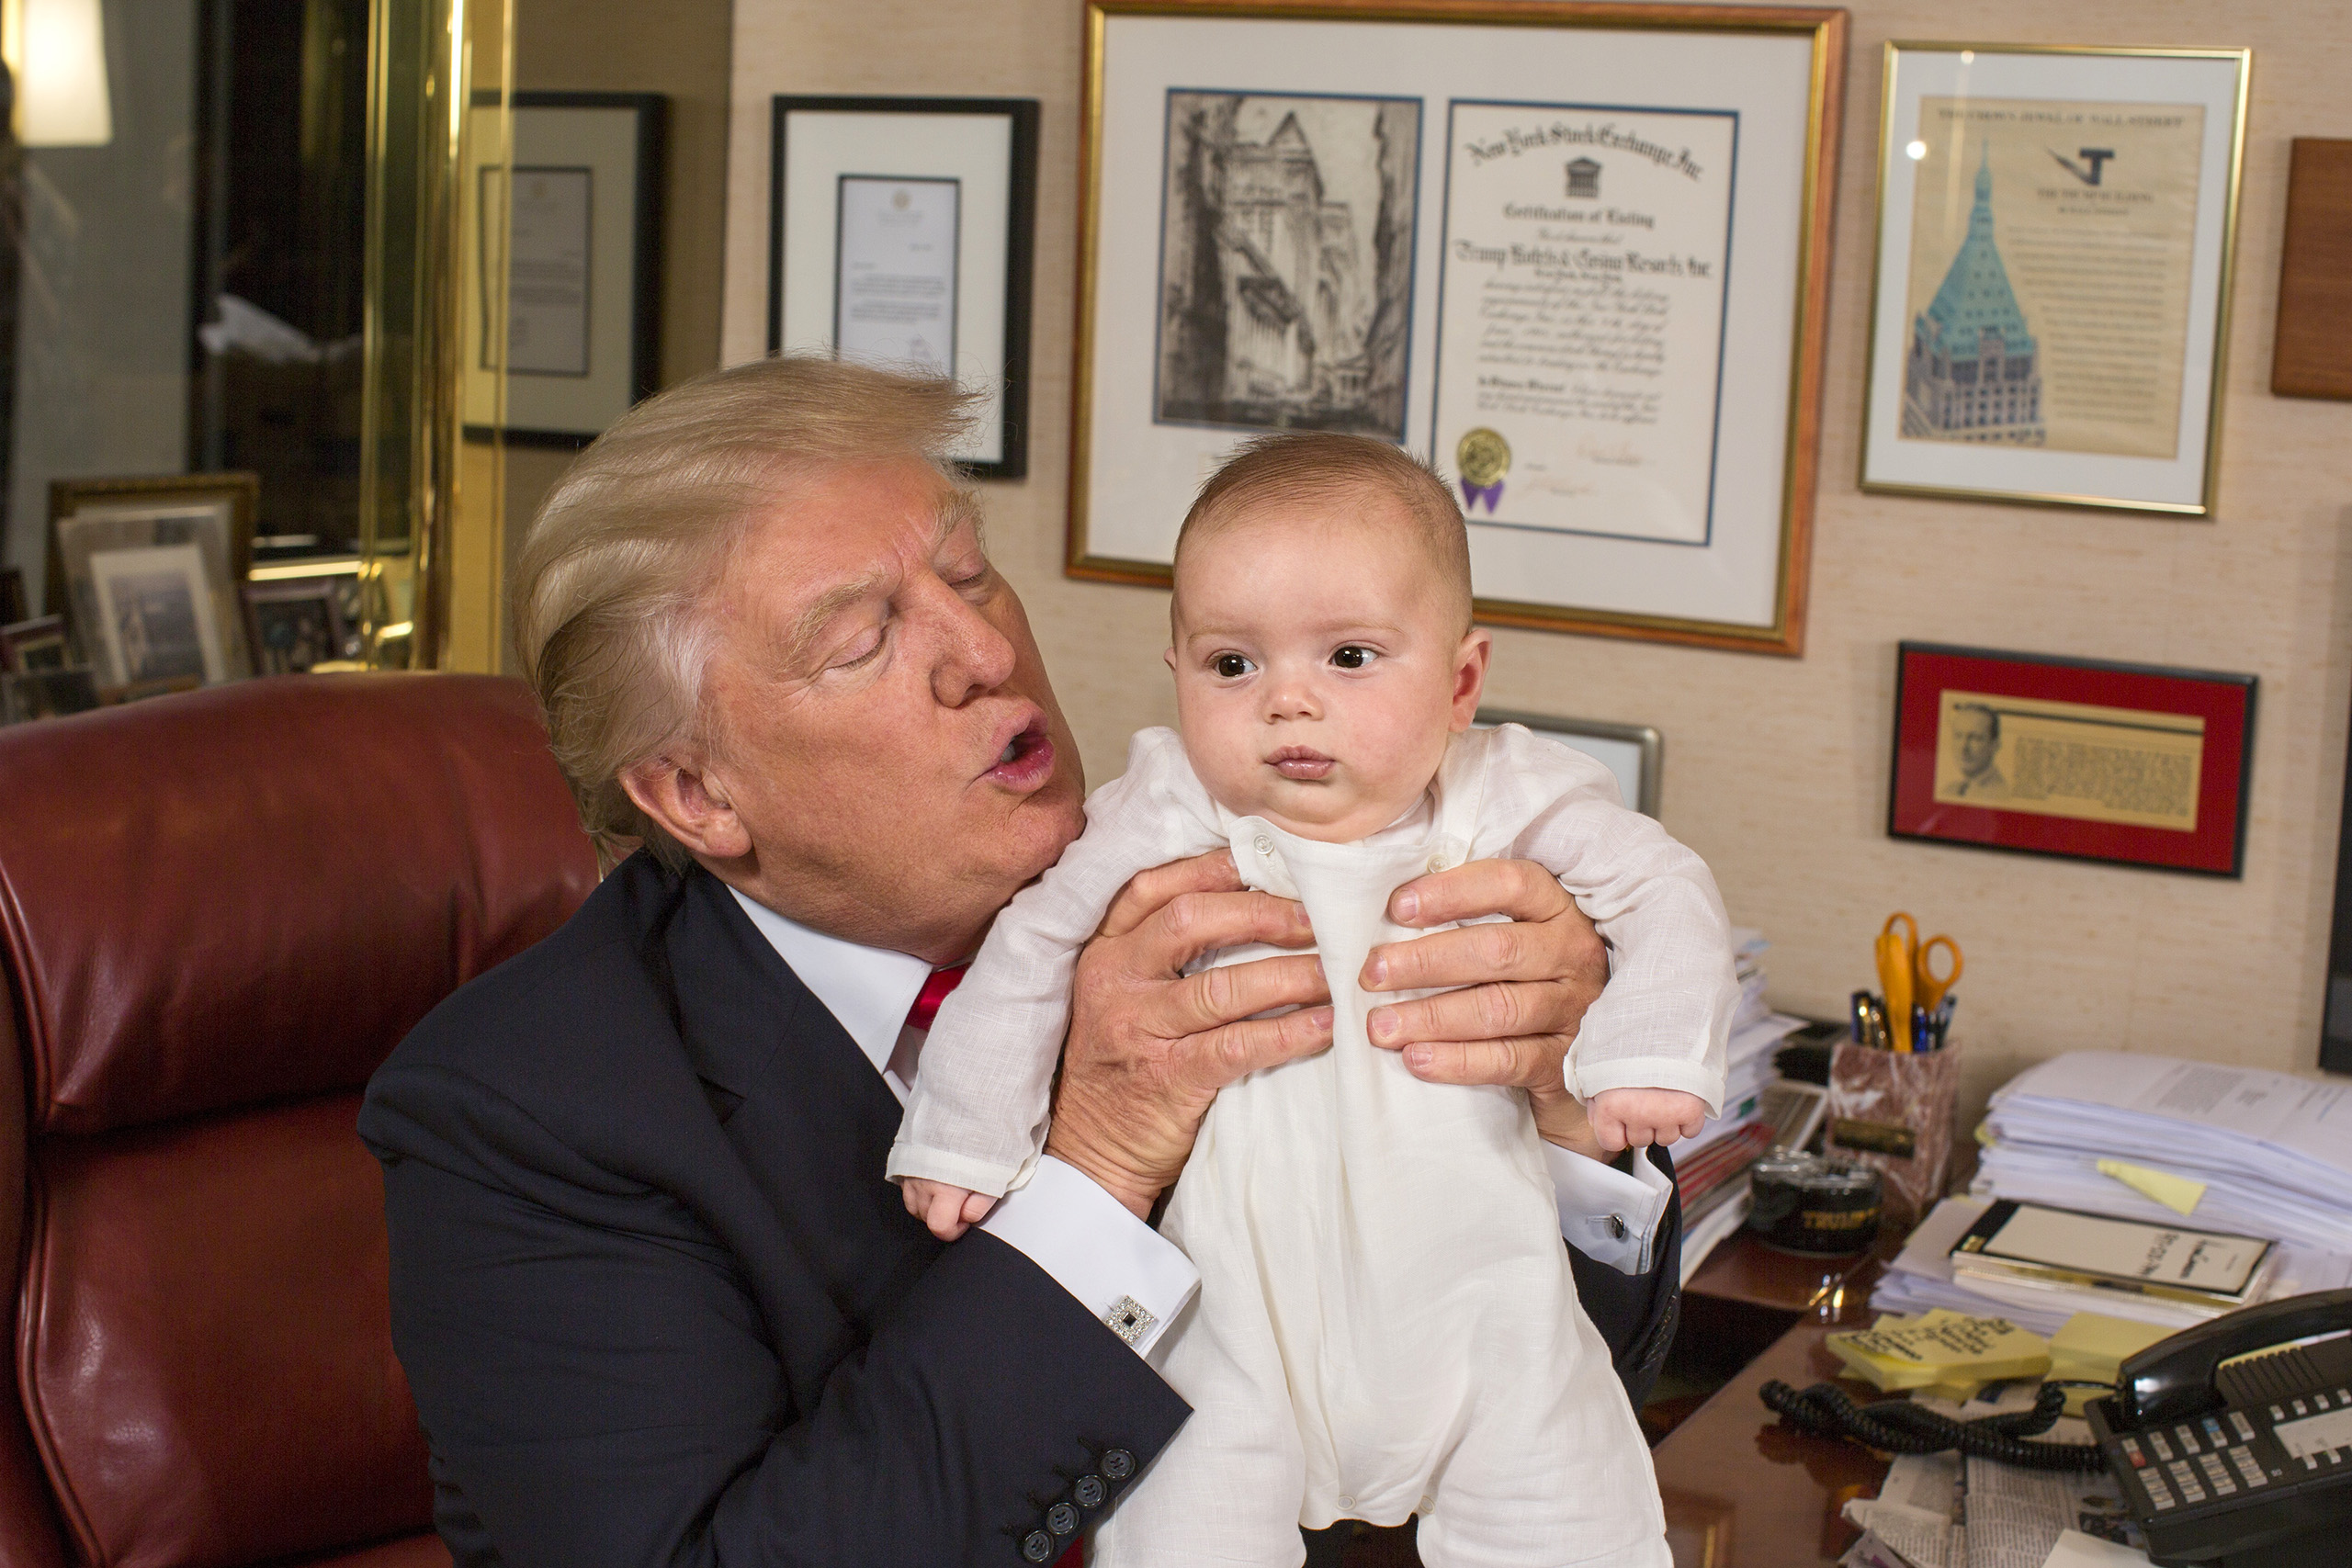 Republican presidential candidate Donald Trump with his grandson Theodore James in Trump’s office in New York City on July 11, 2016.